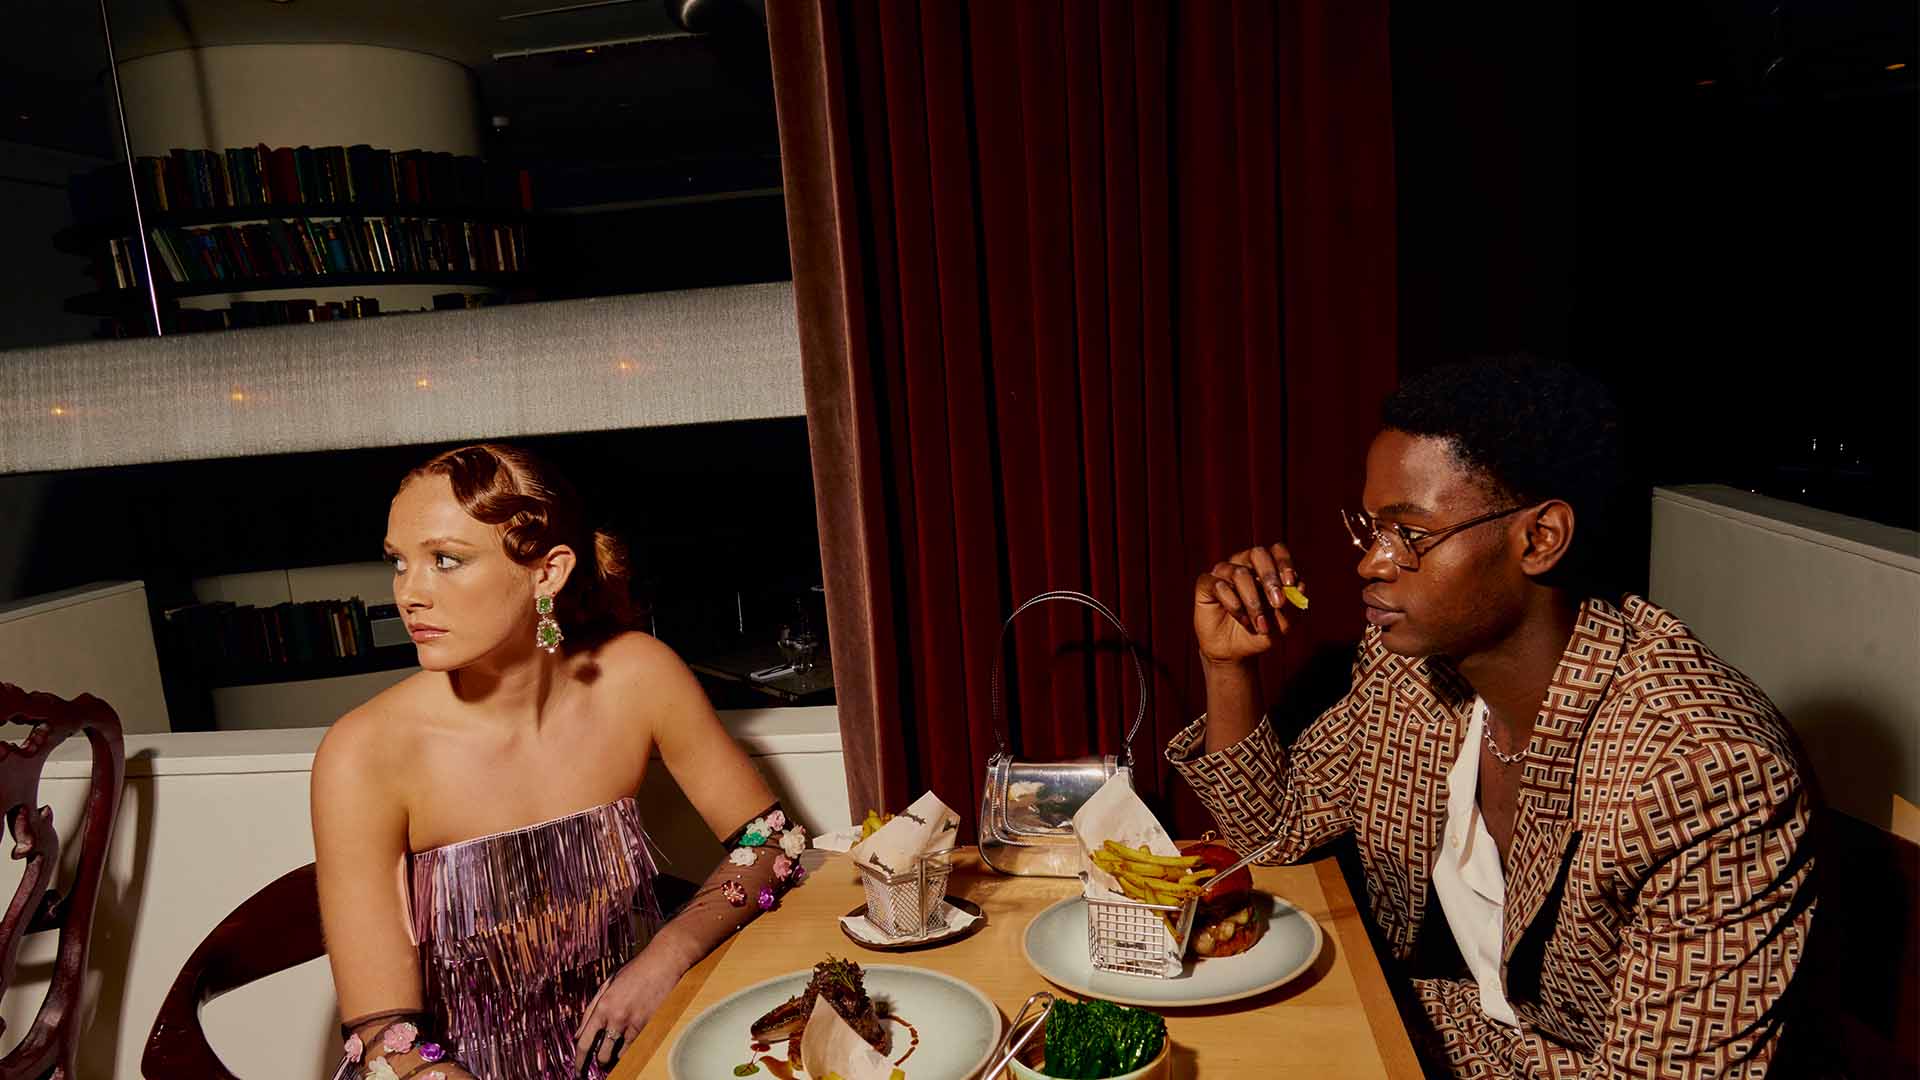 Man and woman in dressy clothes sitting at table with multiple dishes